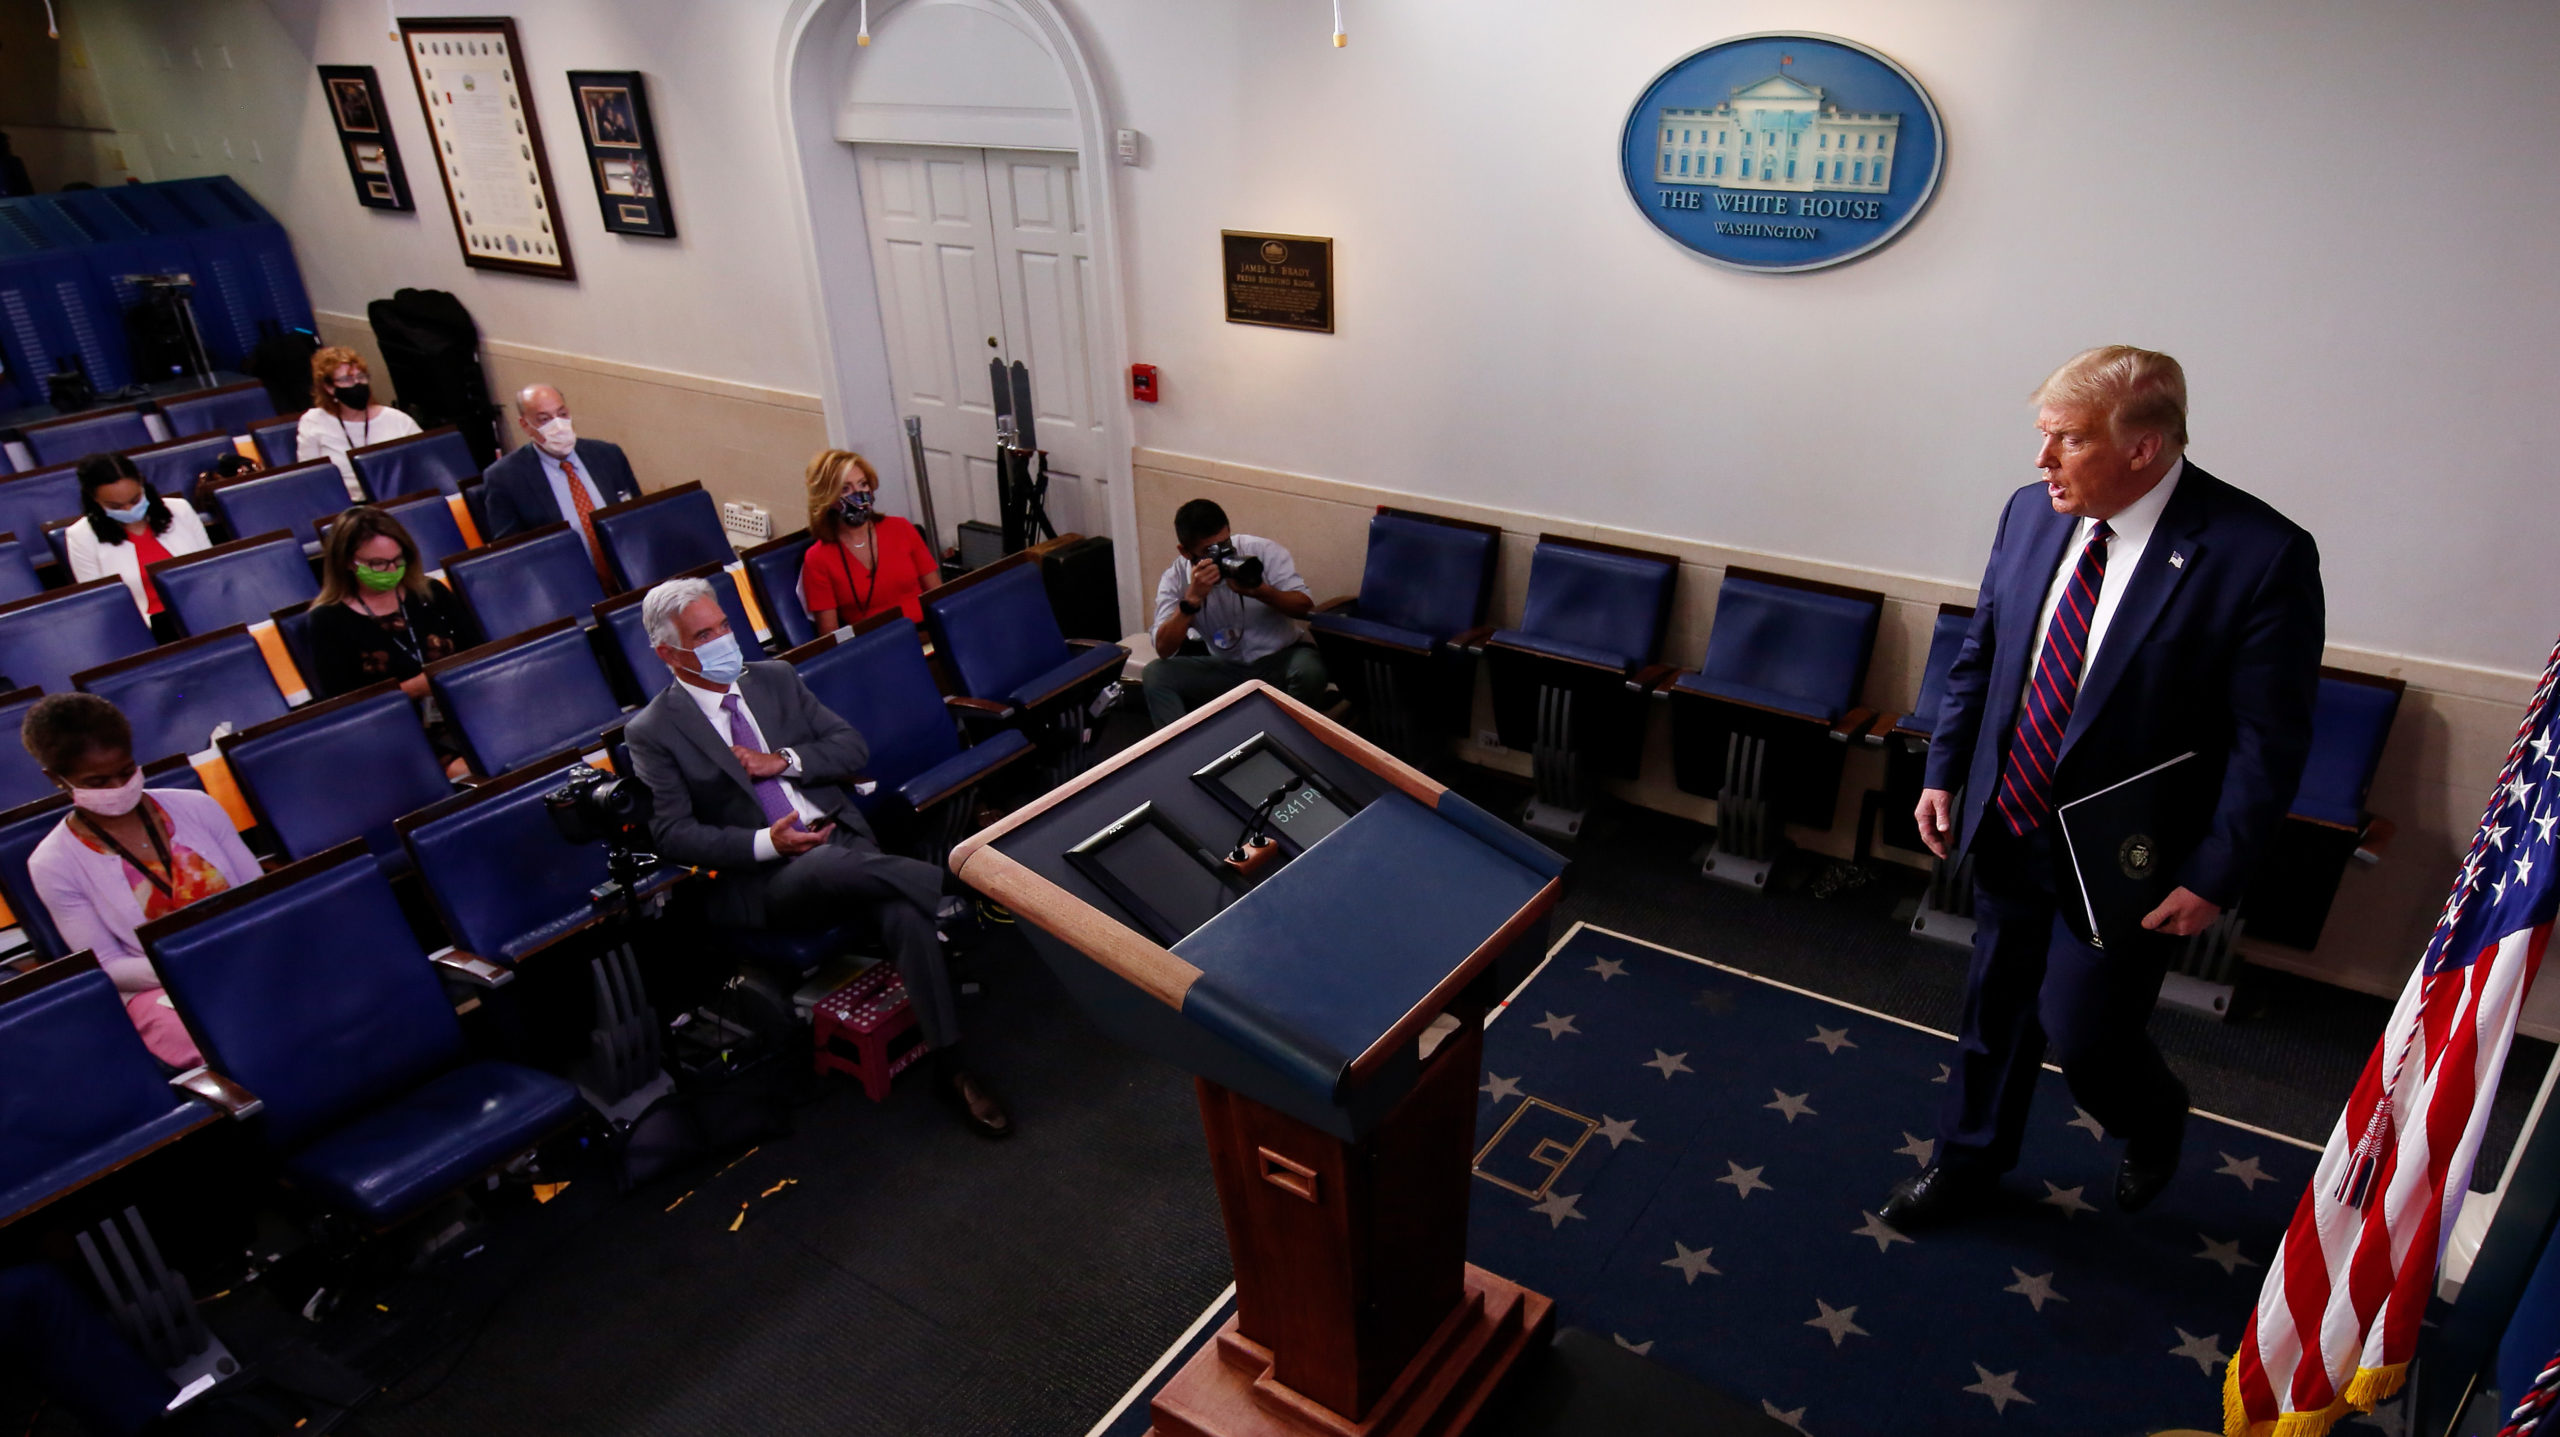 U.S. President Donald Trump arrives at a news conference in the James Brady Briefing Room of the White House July 30, 2020. (Photo: Alex Wong, Getty Images)